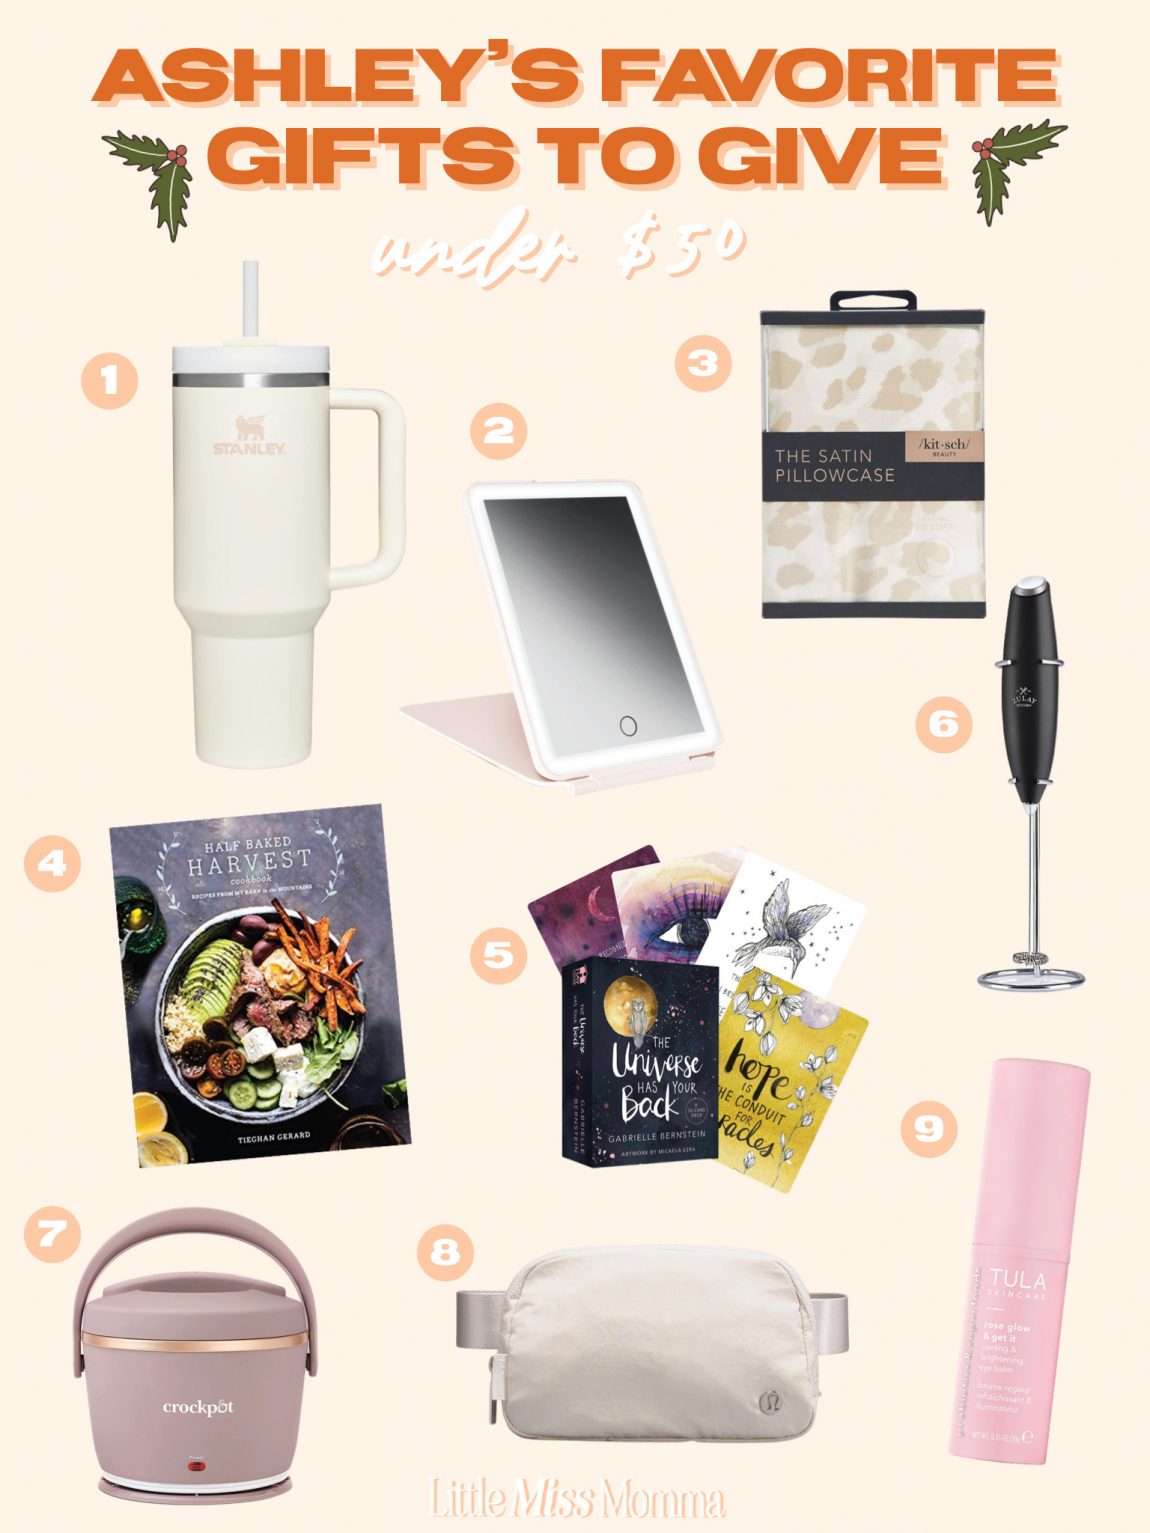 2019 Gift Guide  Gifts For Her Under $25 - Miss Crystal